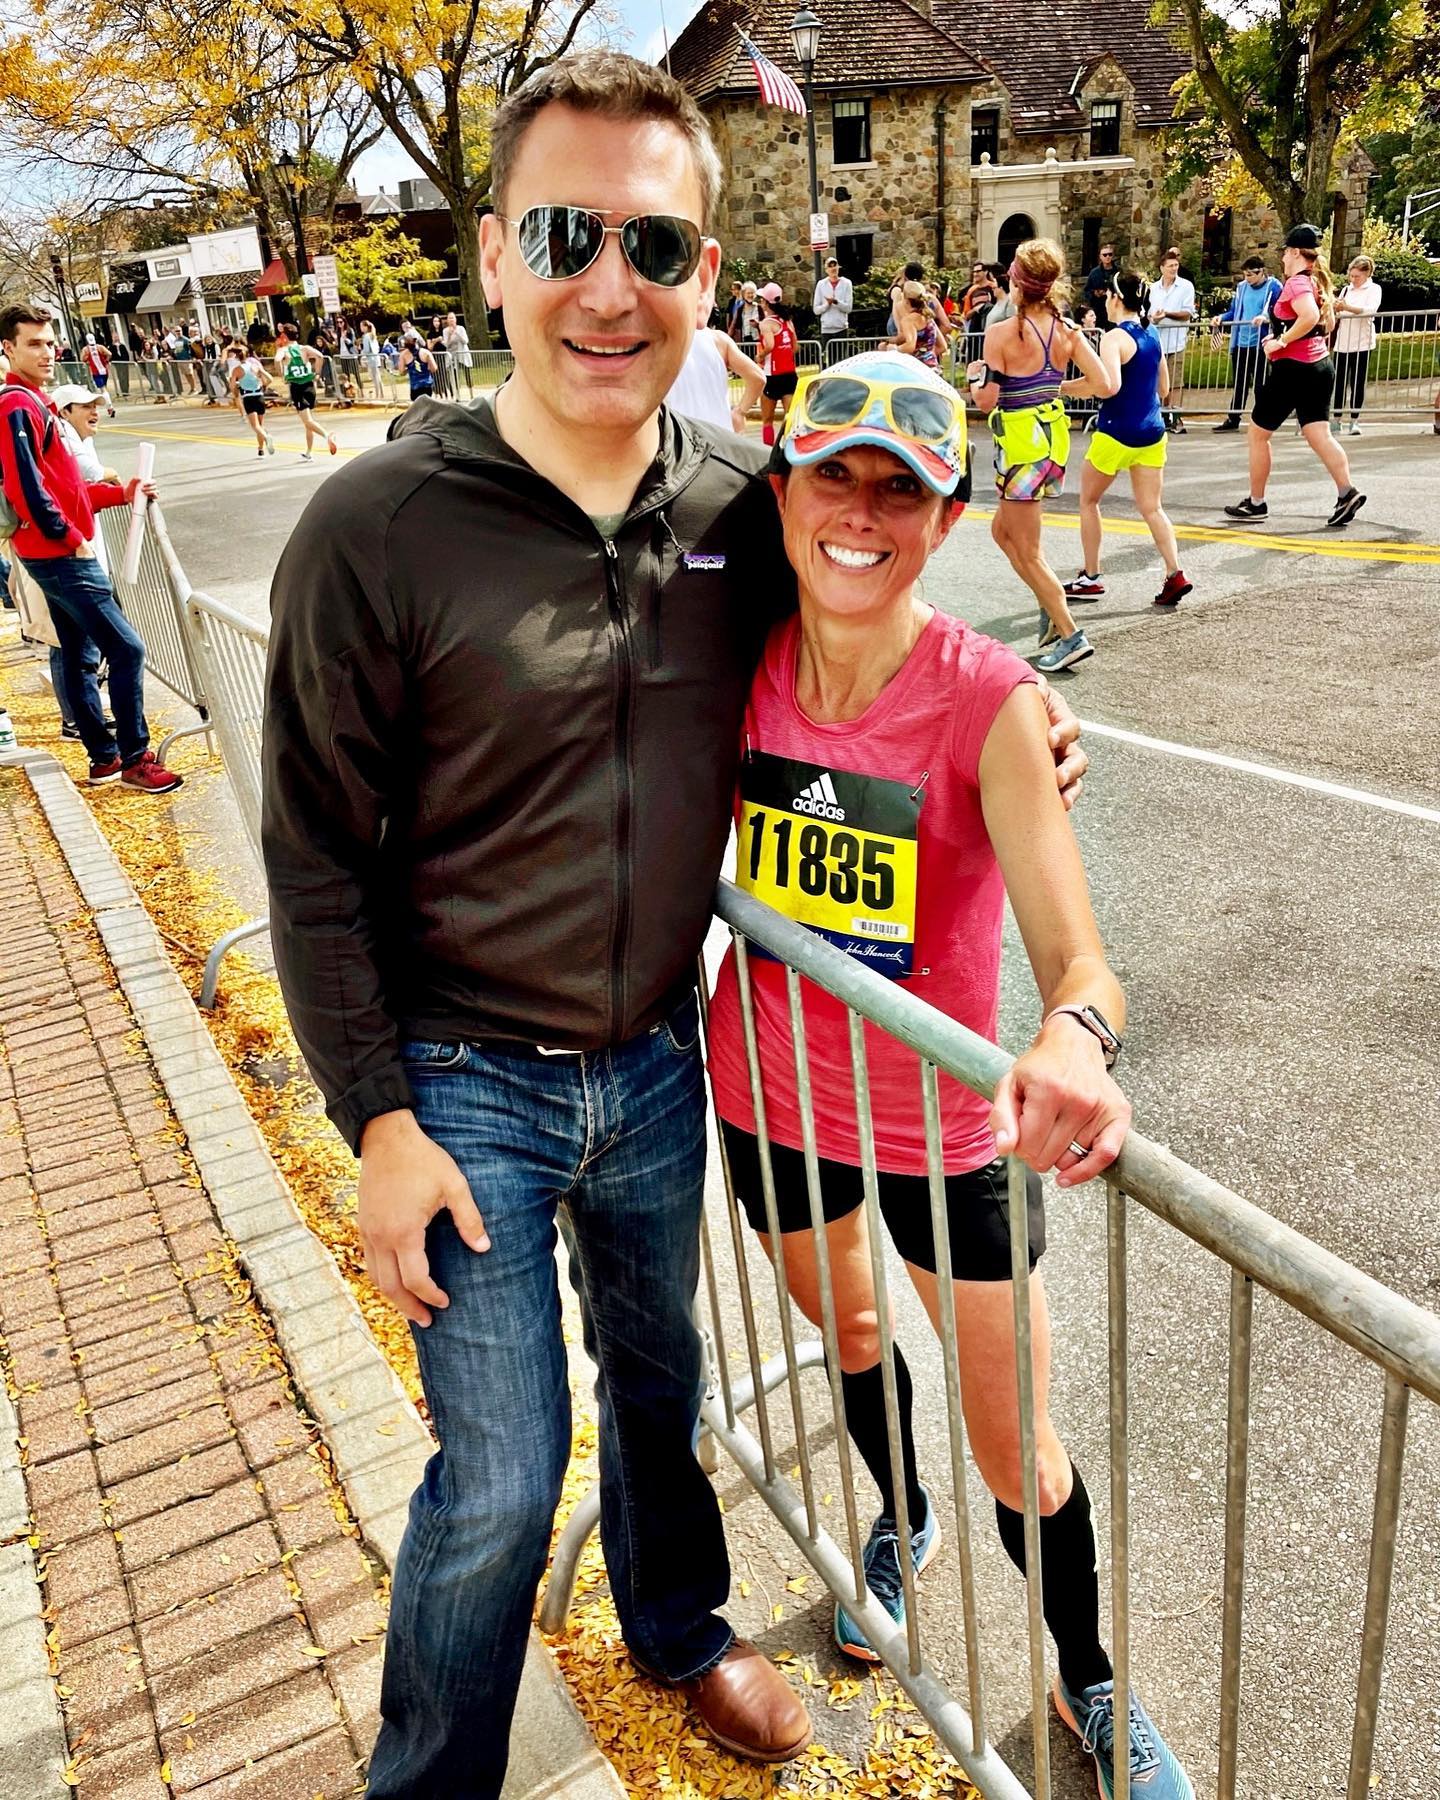 Huge thanks to my best friend/boss and the Old Montana cheer crew who has supported my Boston Marathon adventure…it’s now complete! Onto more house building @somertreat whitefish custom home builder